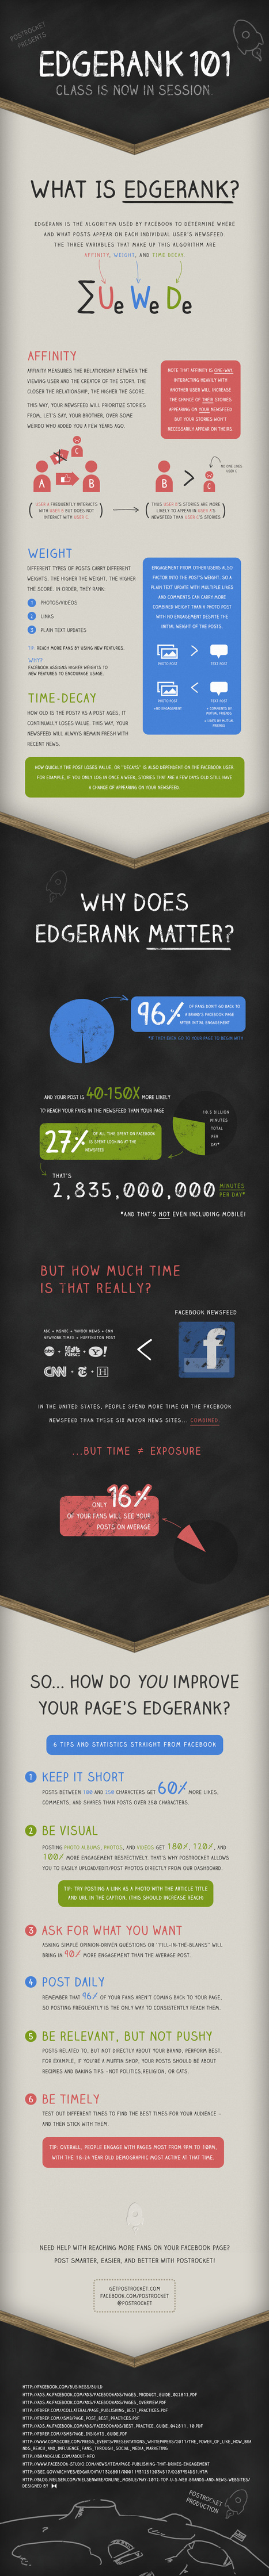 [INFOGRAPHIC] Facebook EdgeRank 101 – Class is Now in Session | Time to Learn | Scoop.it